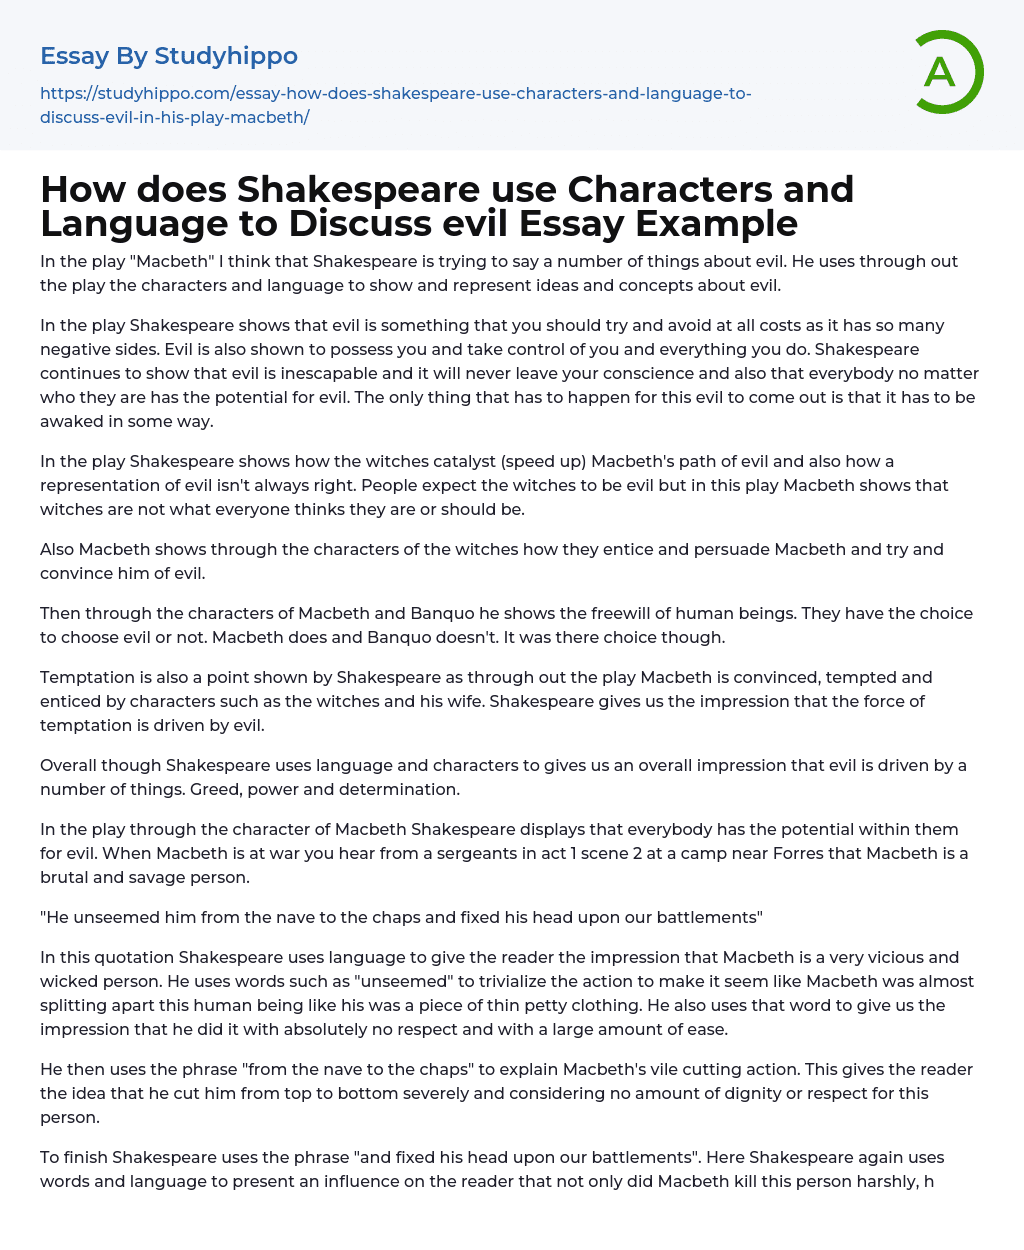 How does Shakespeare use Characters and Language to Discuss evil Essay Example